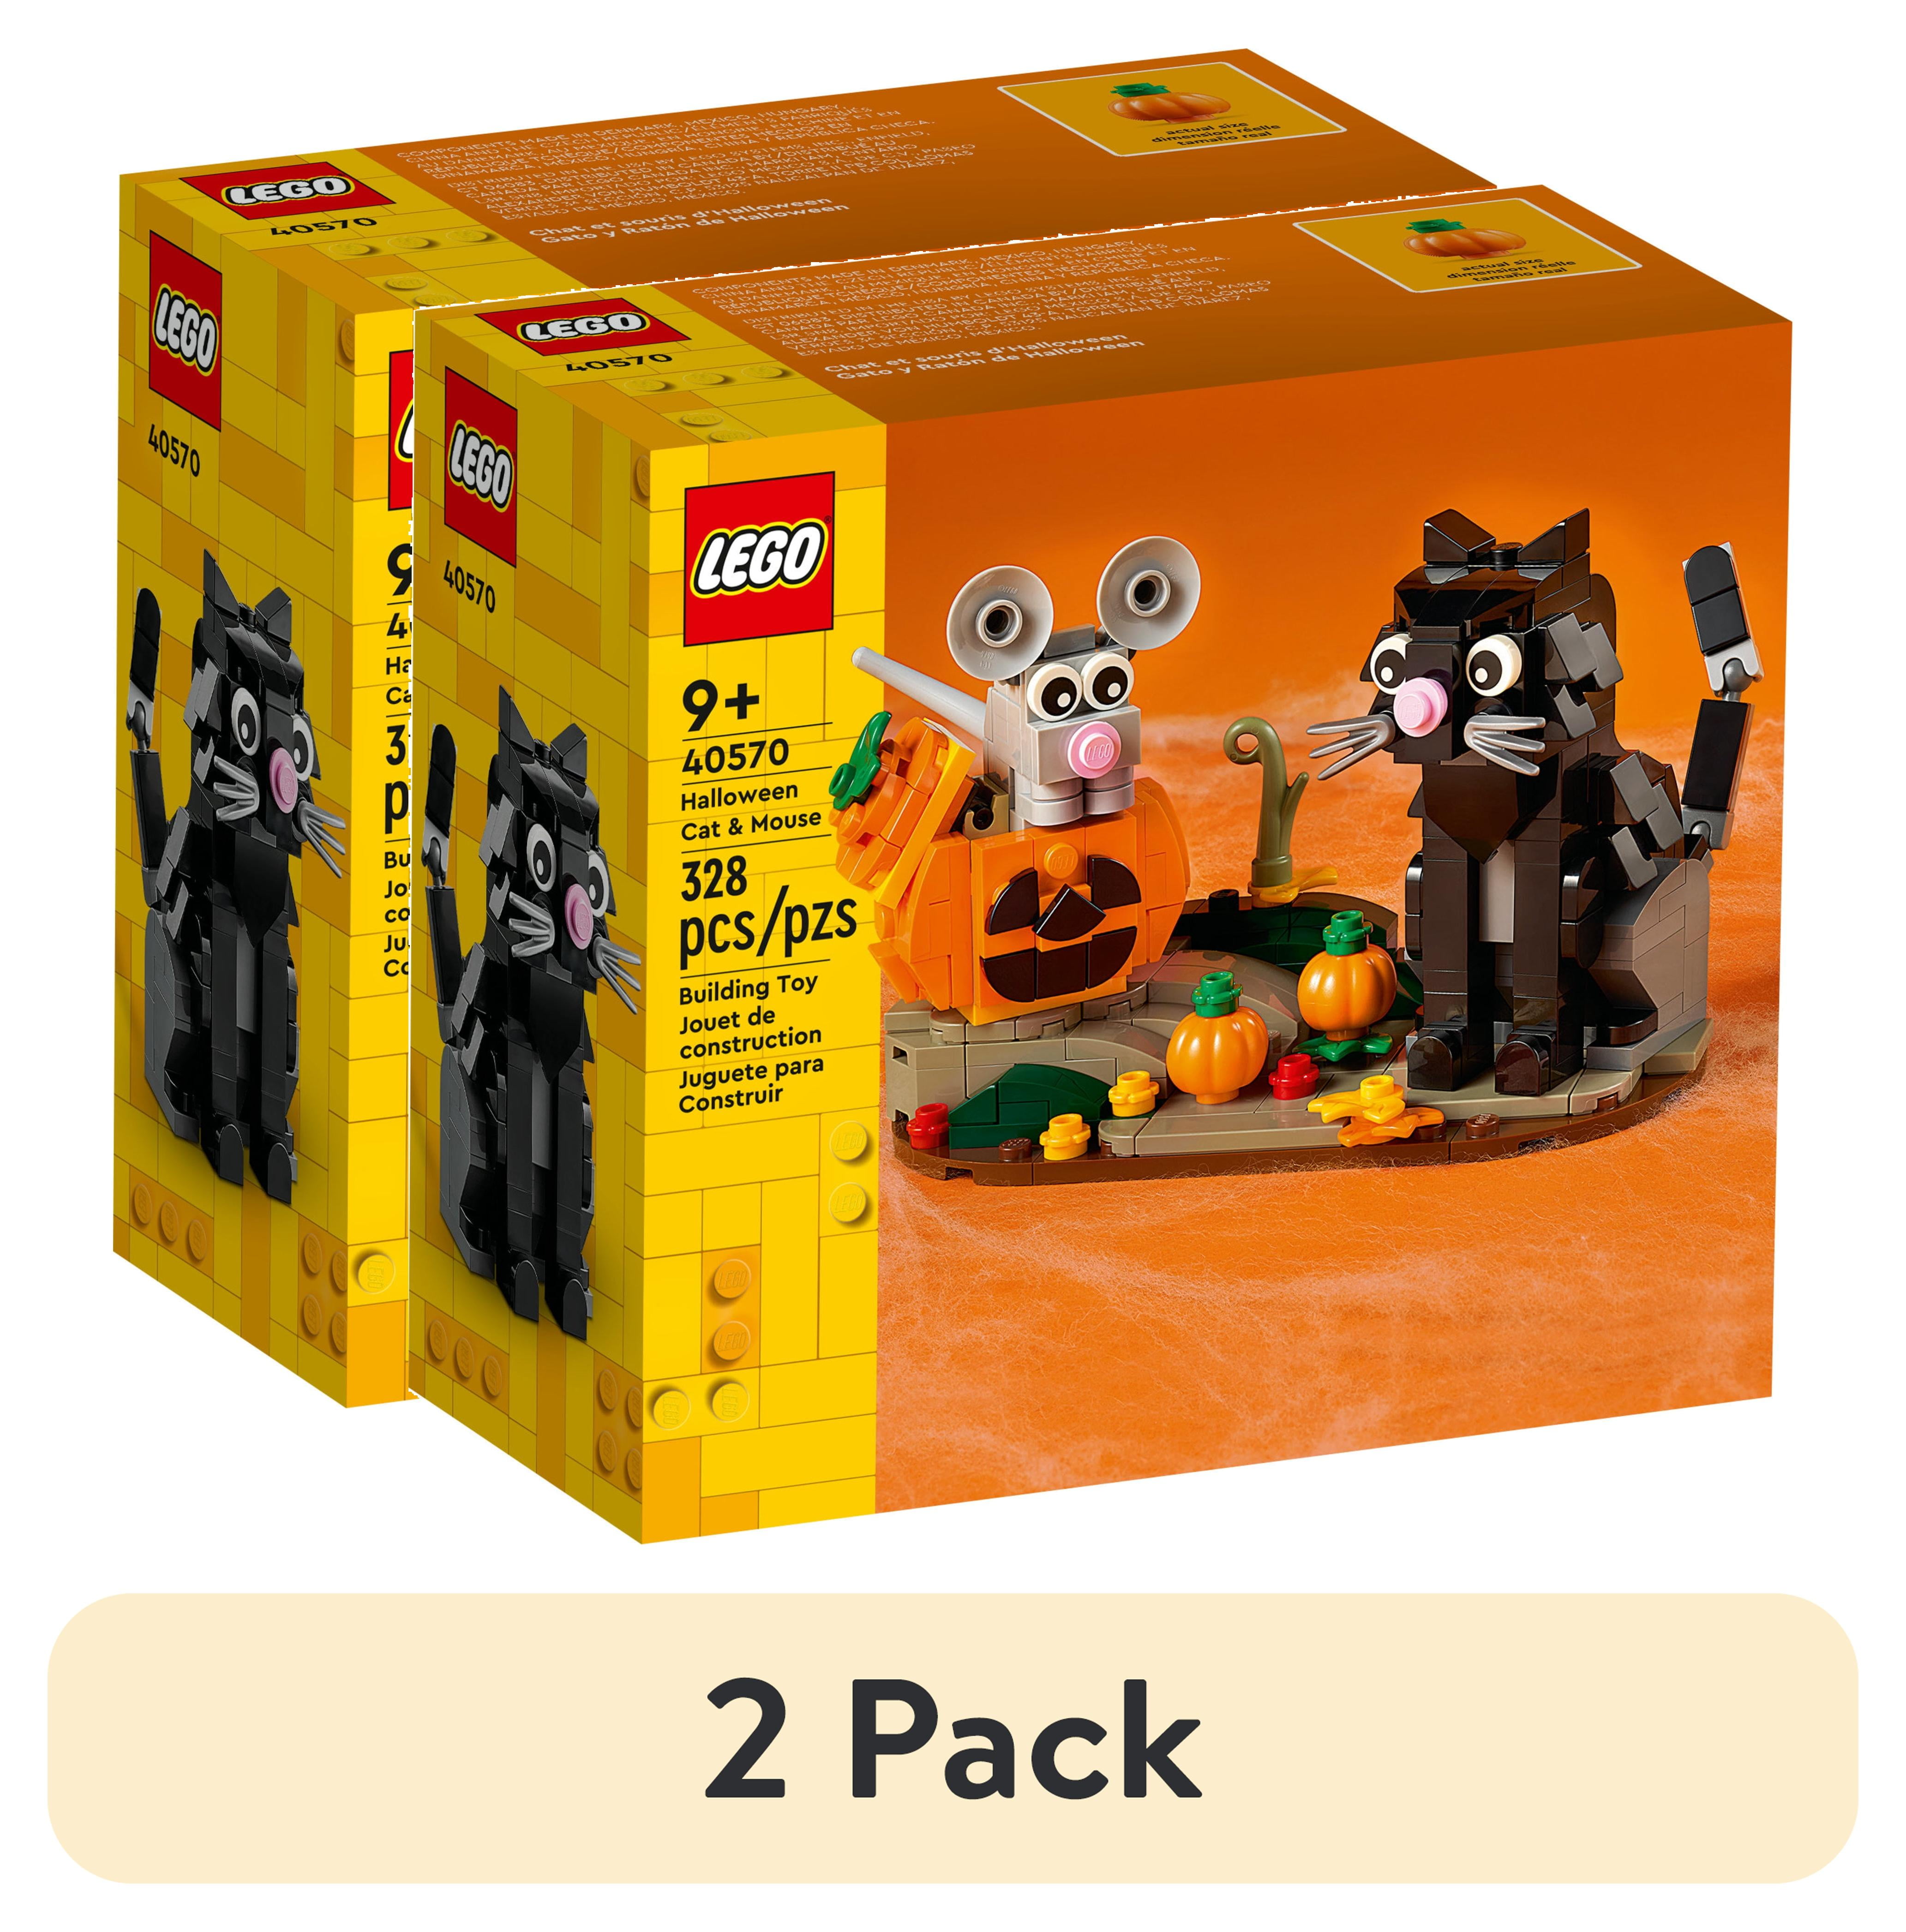 Lego 40570 - Halloween Cat & Mouse